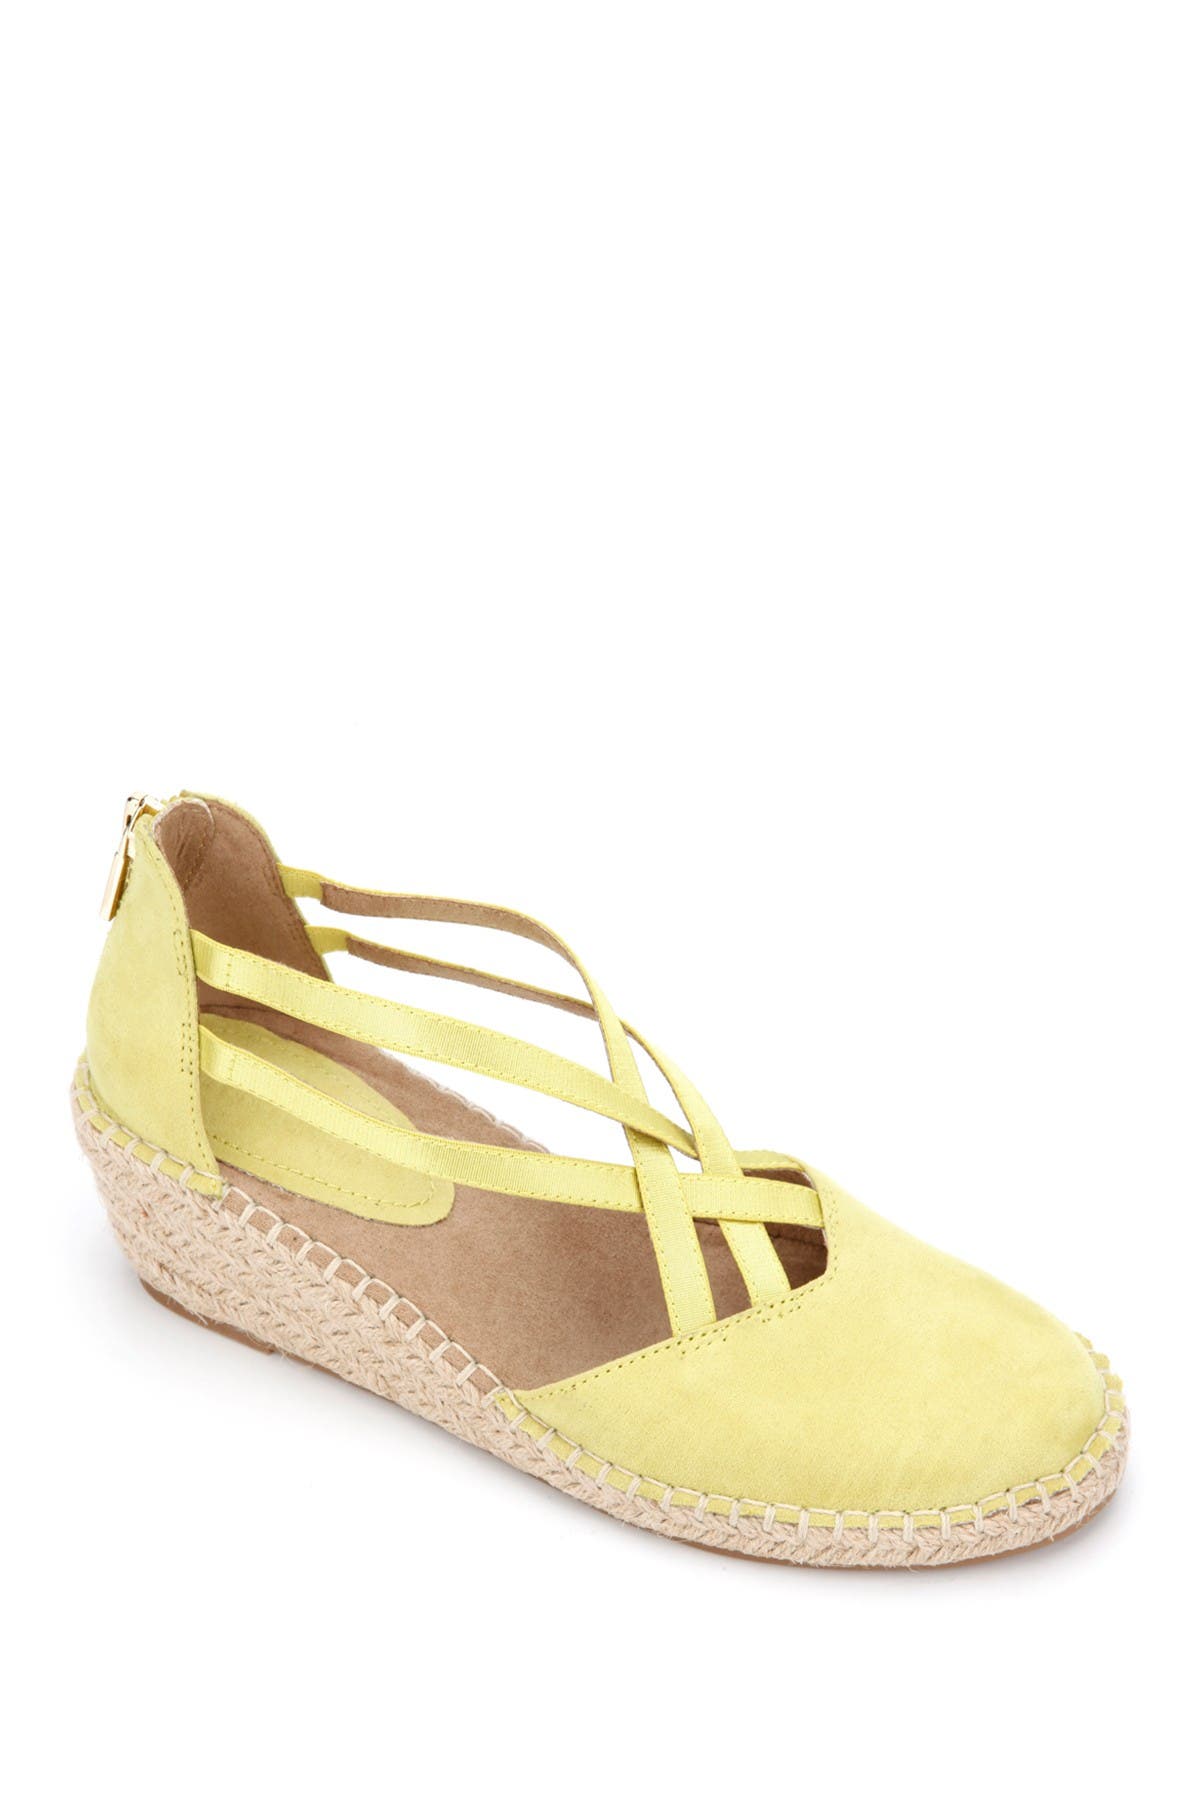 Kenneth Cole Reaction Clo Espadrille Wedge Flat In Lemongrass